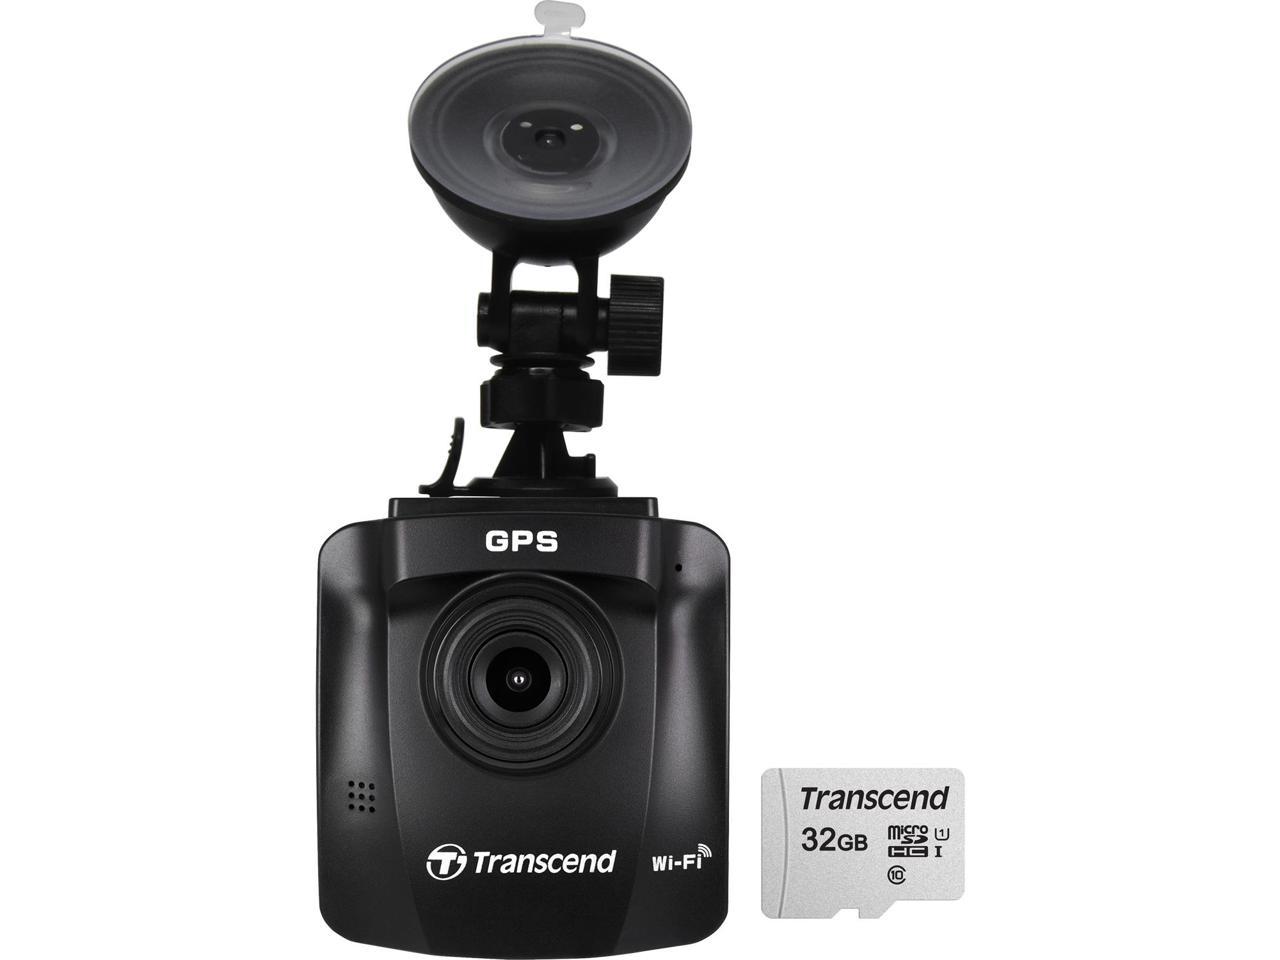 Transcend DrivePro 230 1080p Full HD Car Dashboard Video Recorder with Suction Cup includes 32GB microSDHC Memory Card